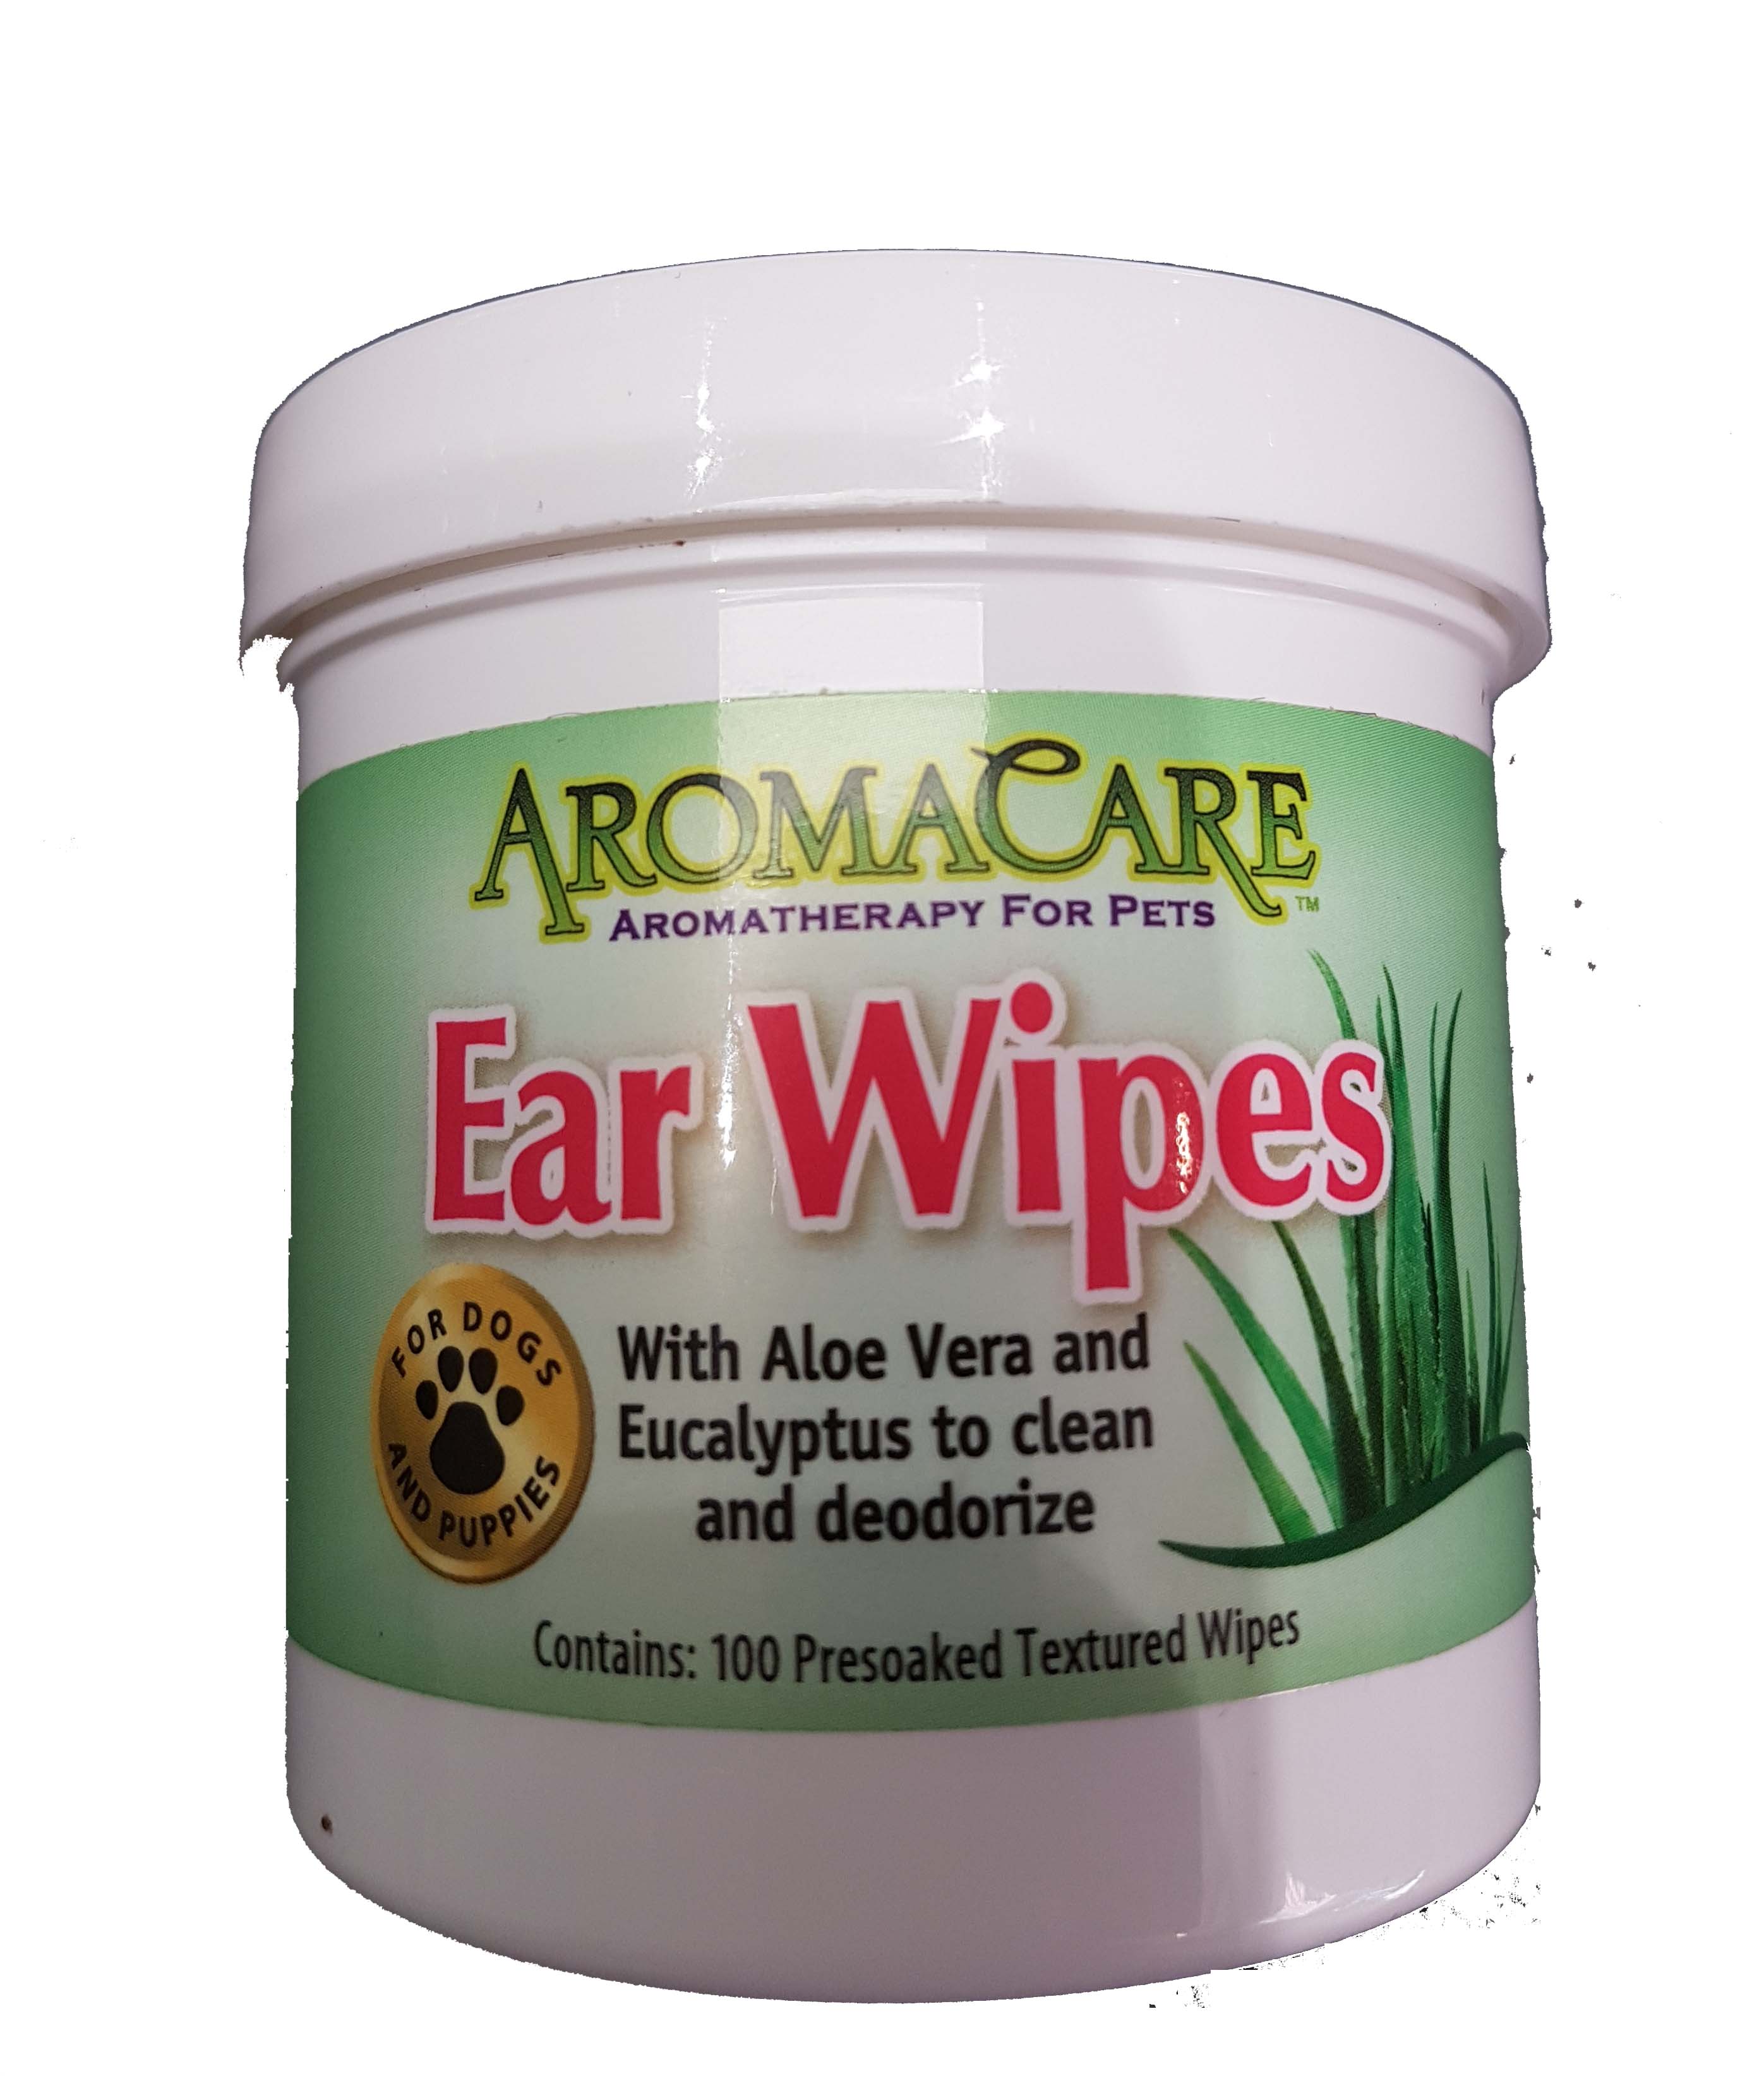 Arome care Ear wipes